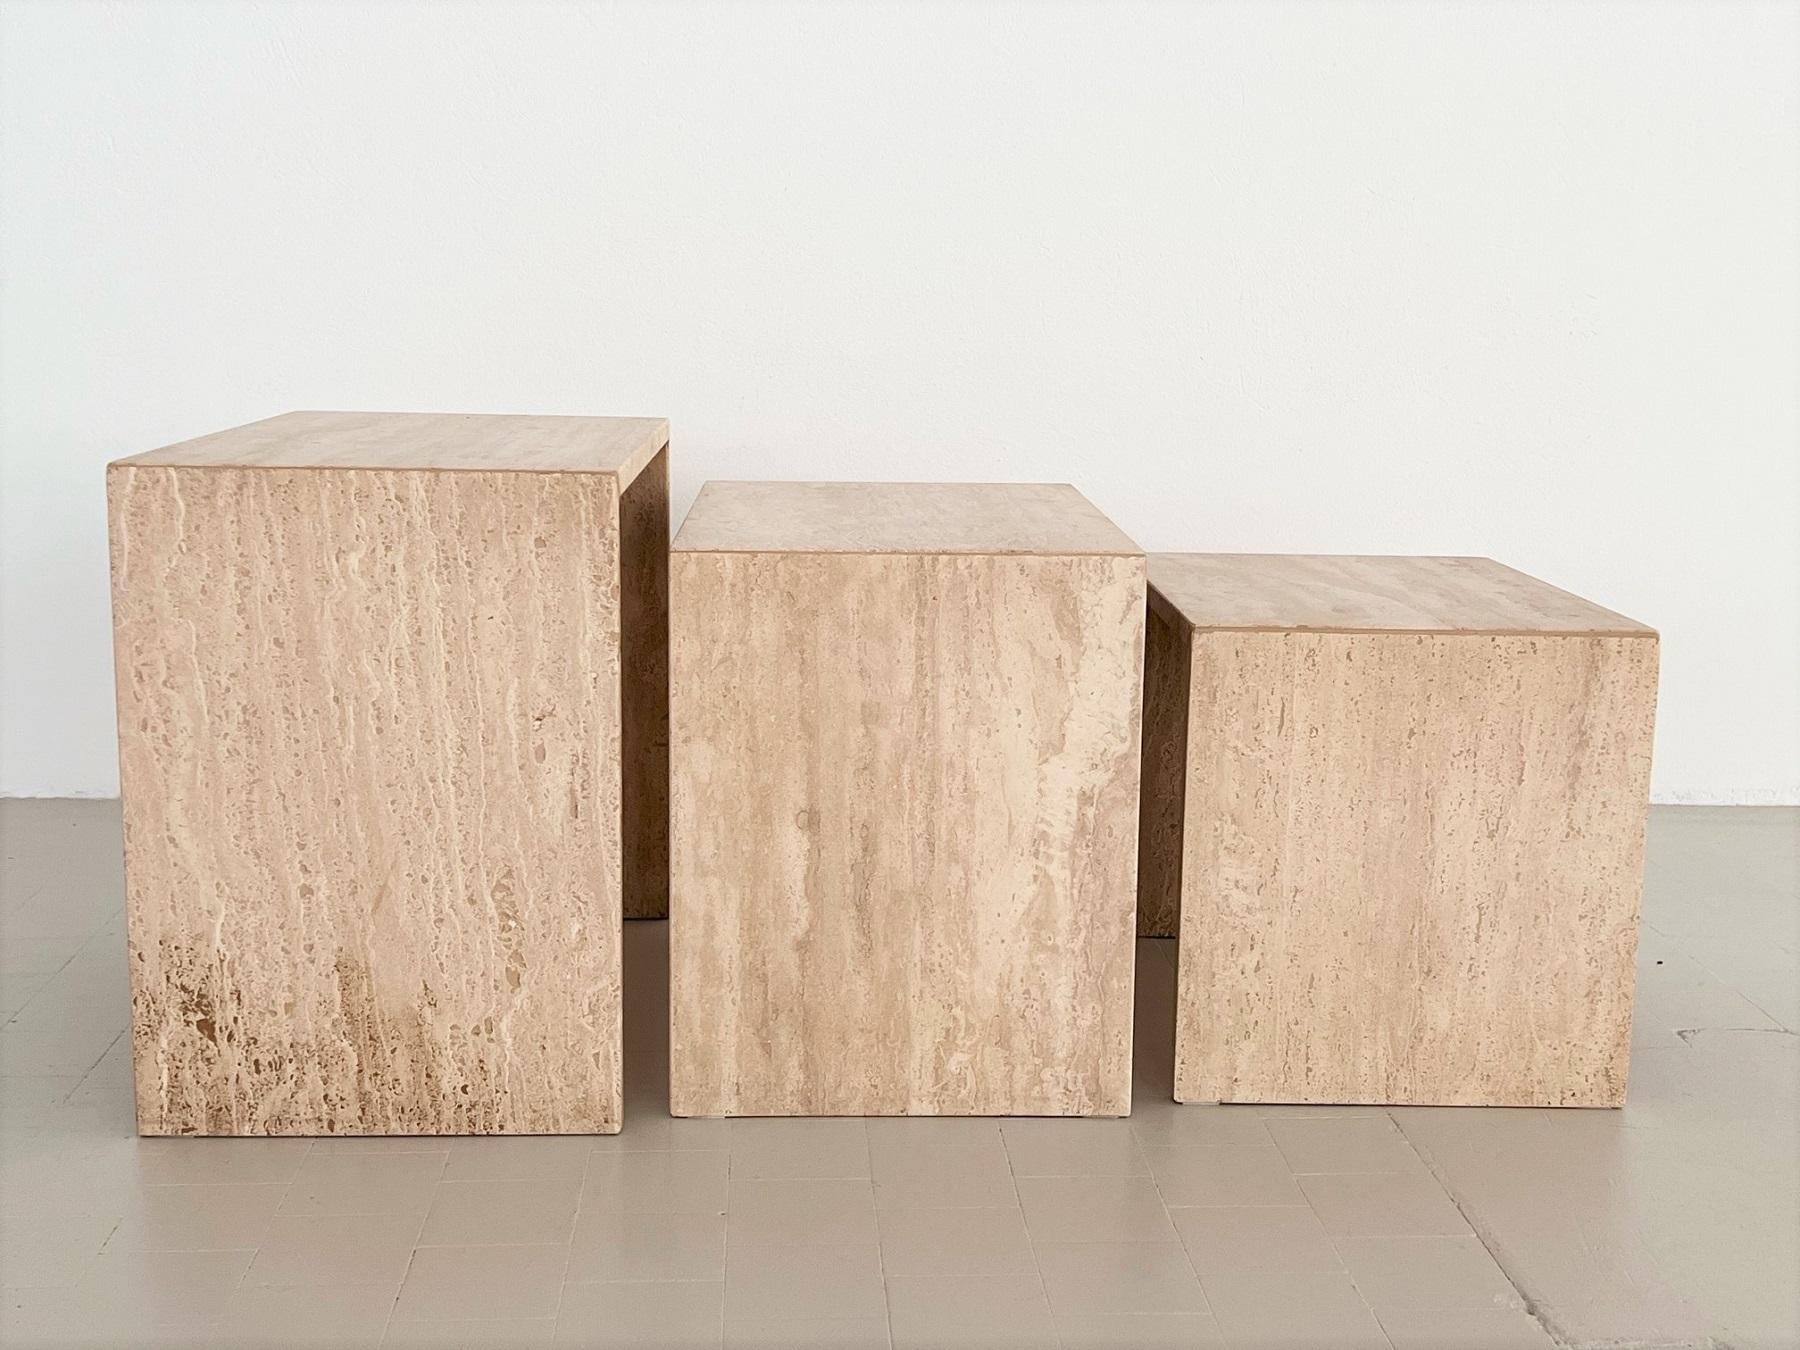 Hand-Crafted Nesting Coffee Tables in Travertine Stone from the 1970s, Set of Three For Sale